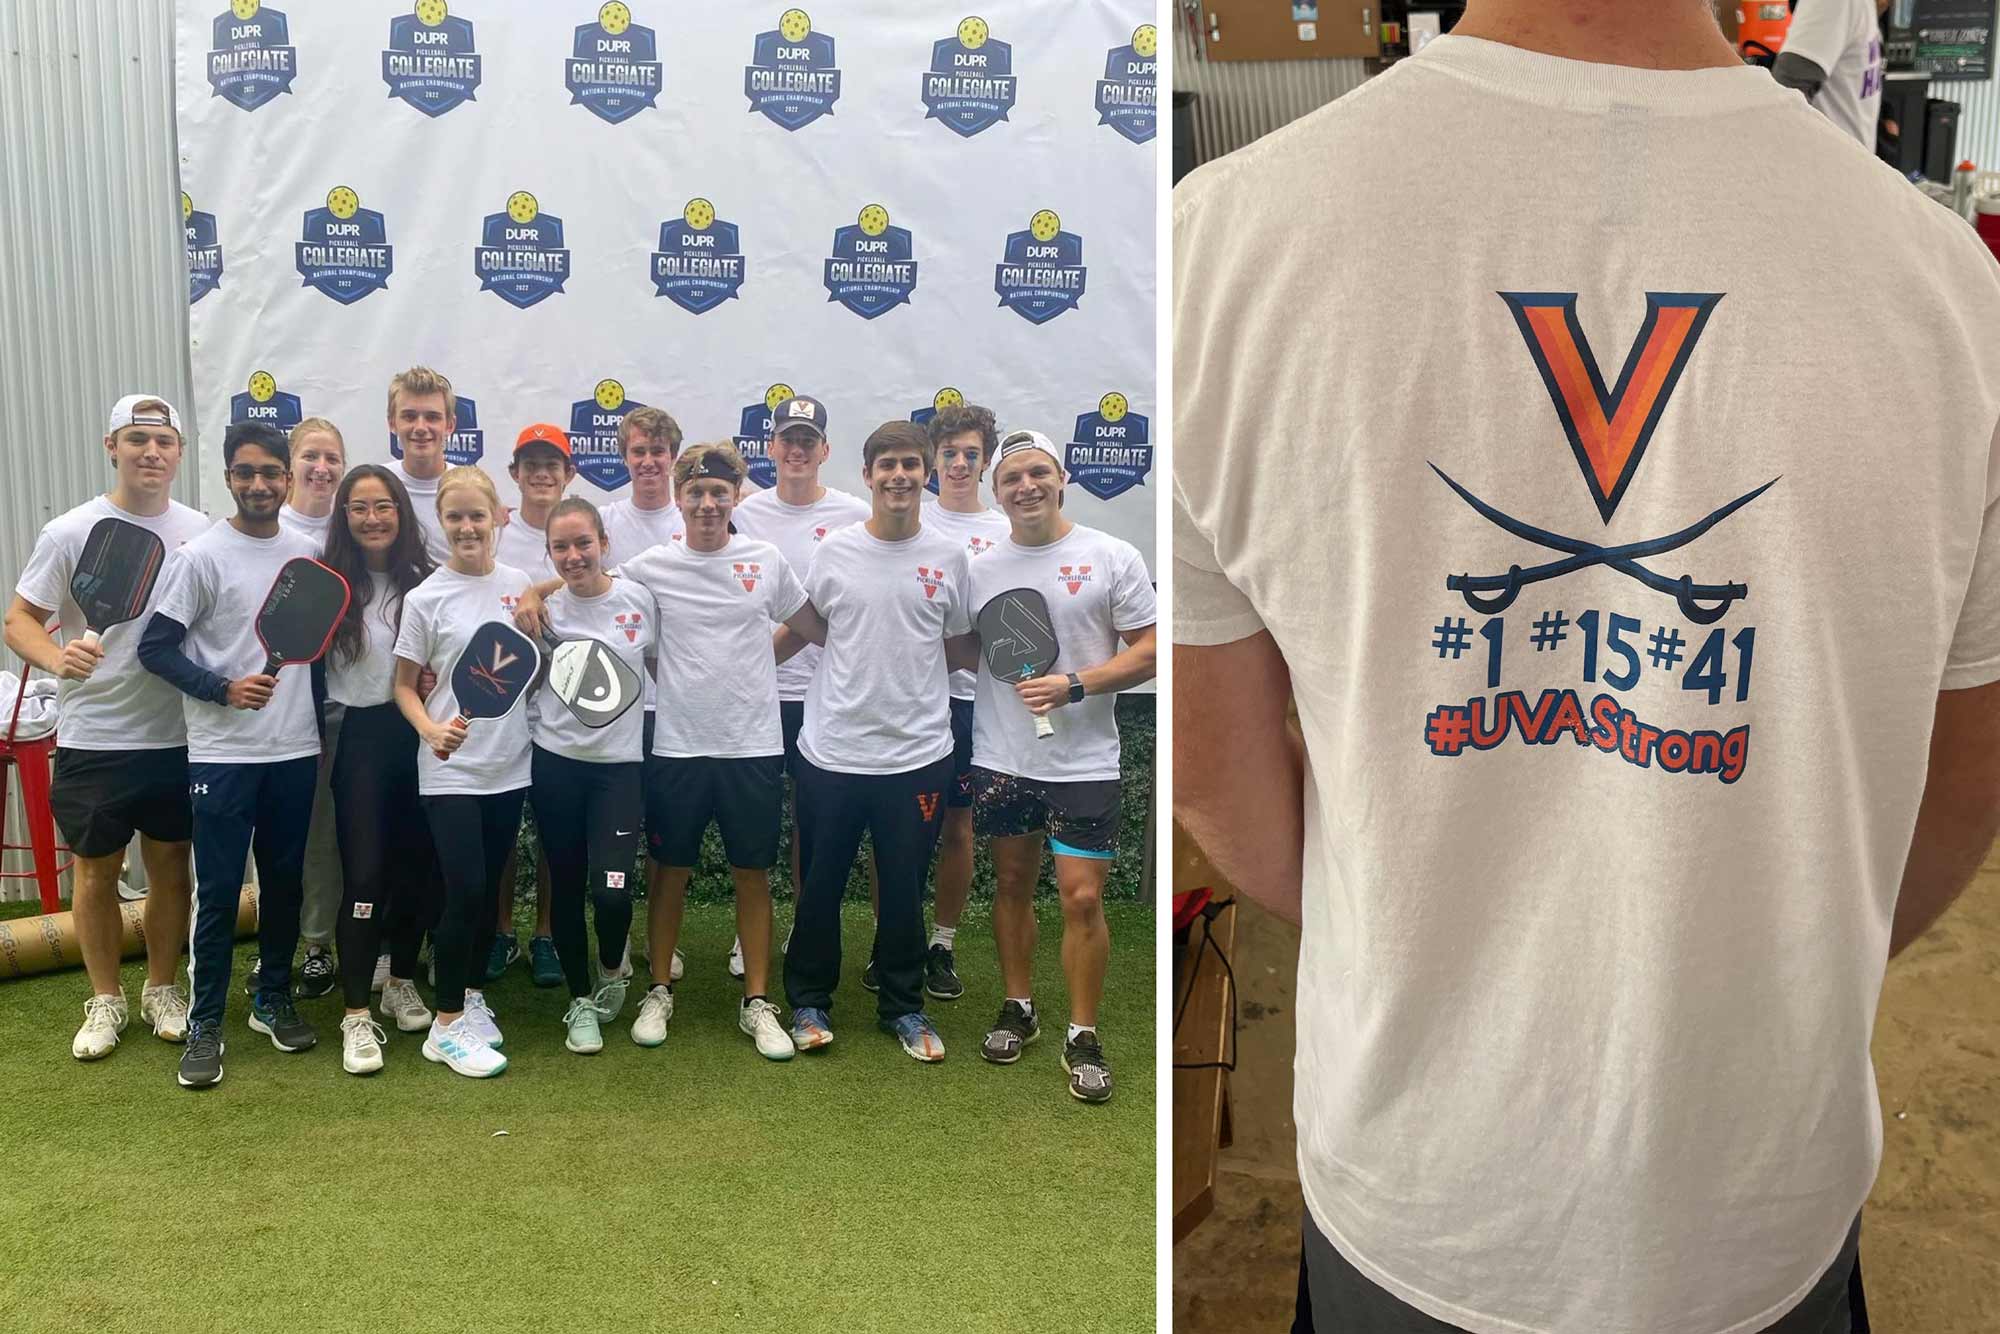 The UVA Pickleball team poses for a group shot wearing t-shirts with the V-Sabre logo, one, fifteen, forty-one, and #UVAStrong